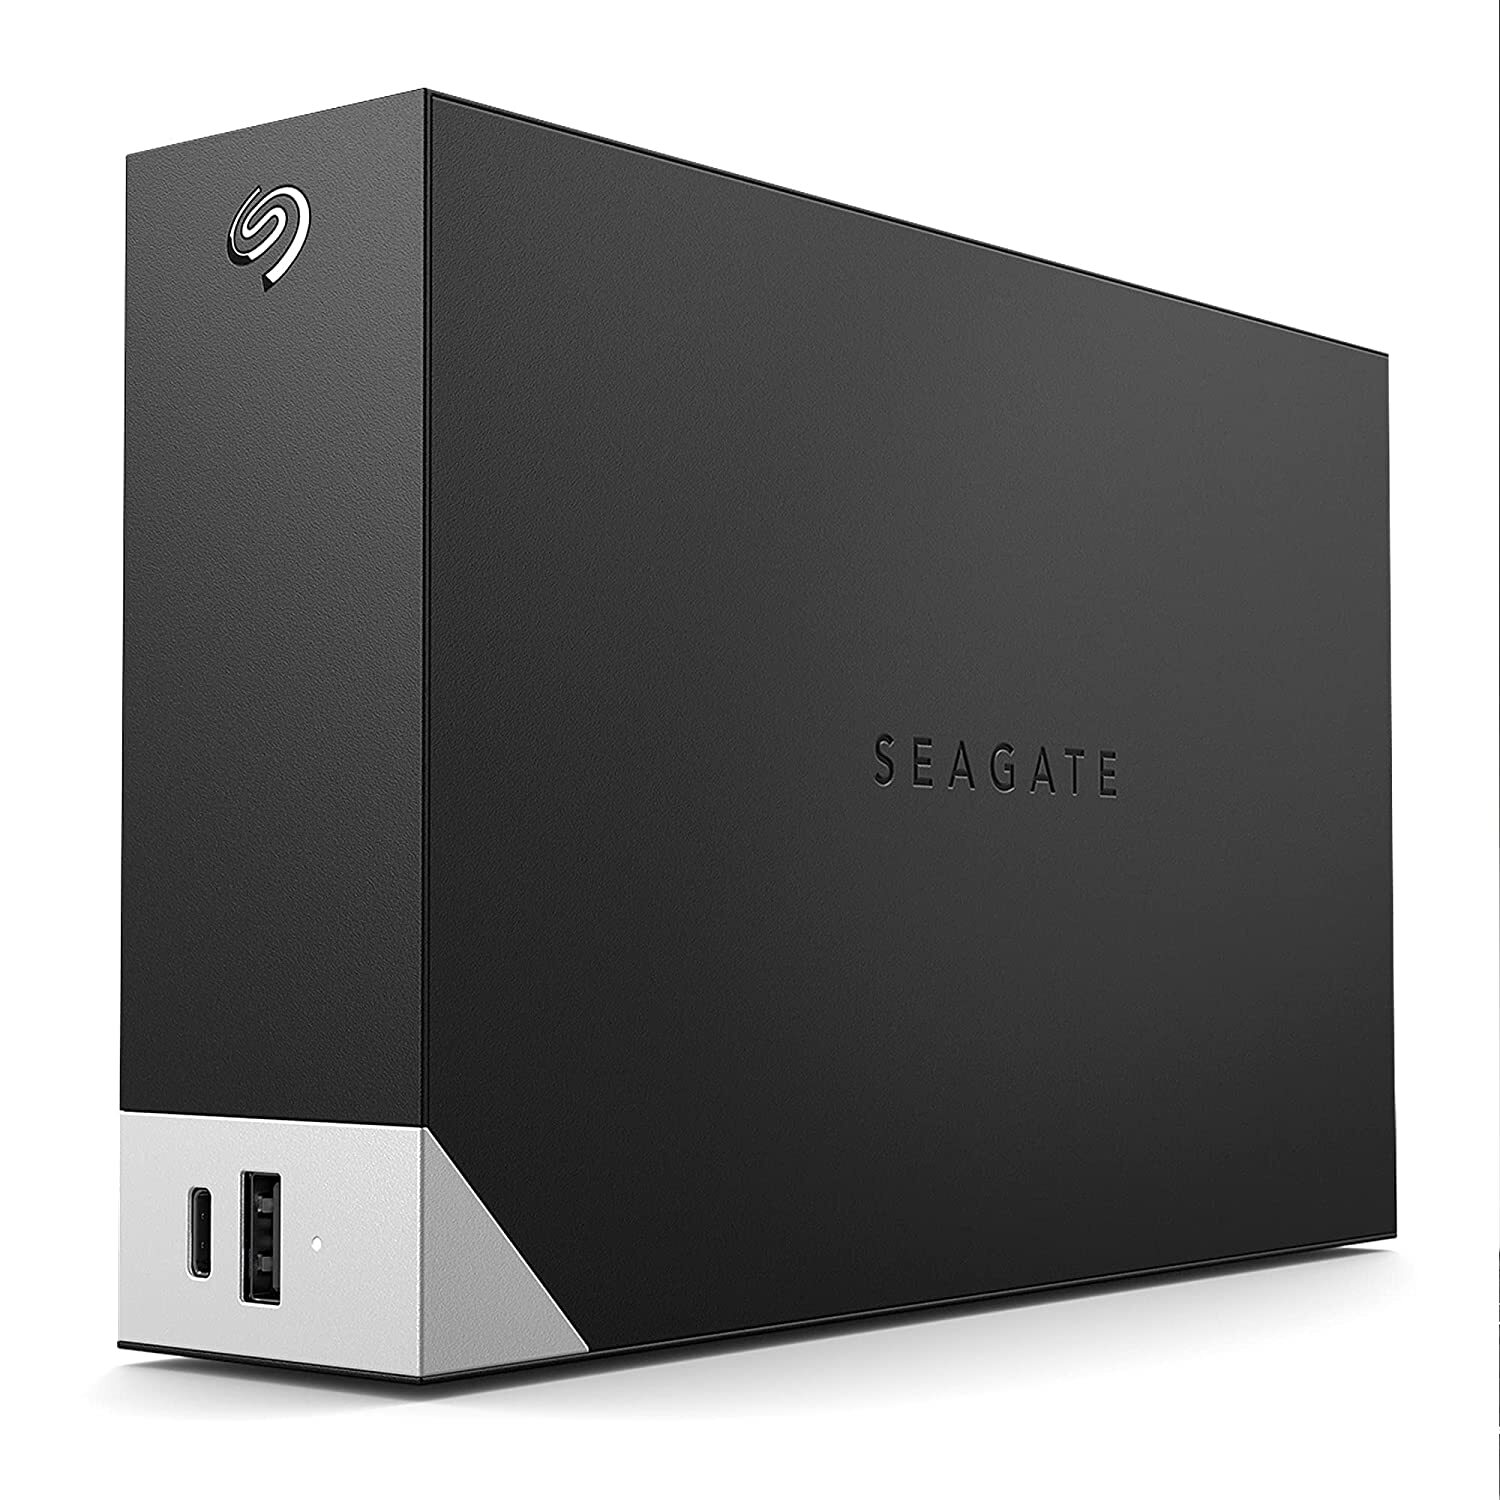 Seagate One Touch Hub 4TB Desktop External HDD – USB-C & USB 3.0 Port, with 3 yr Data Recovery Services, for Computer PC Laptop Mac, 4 Months Adobe Photography Plan (STLC4000400), Black